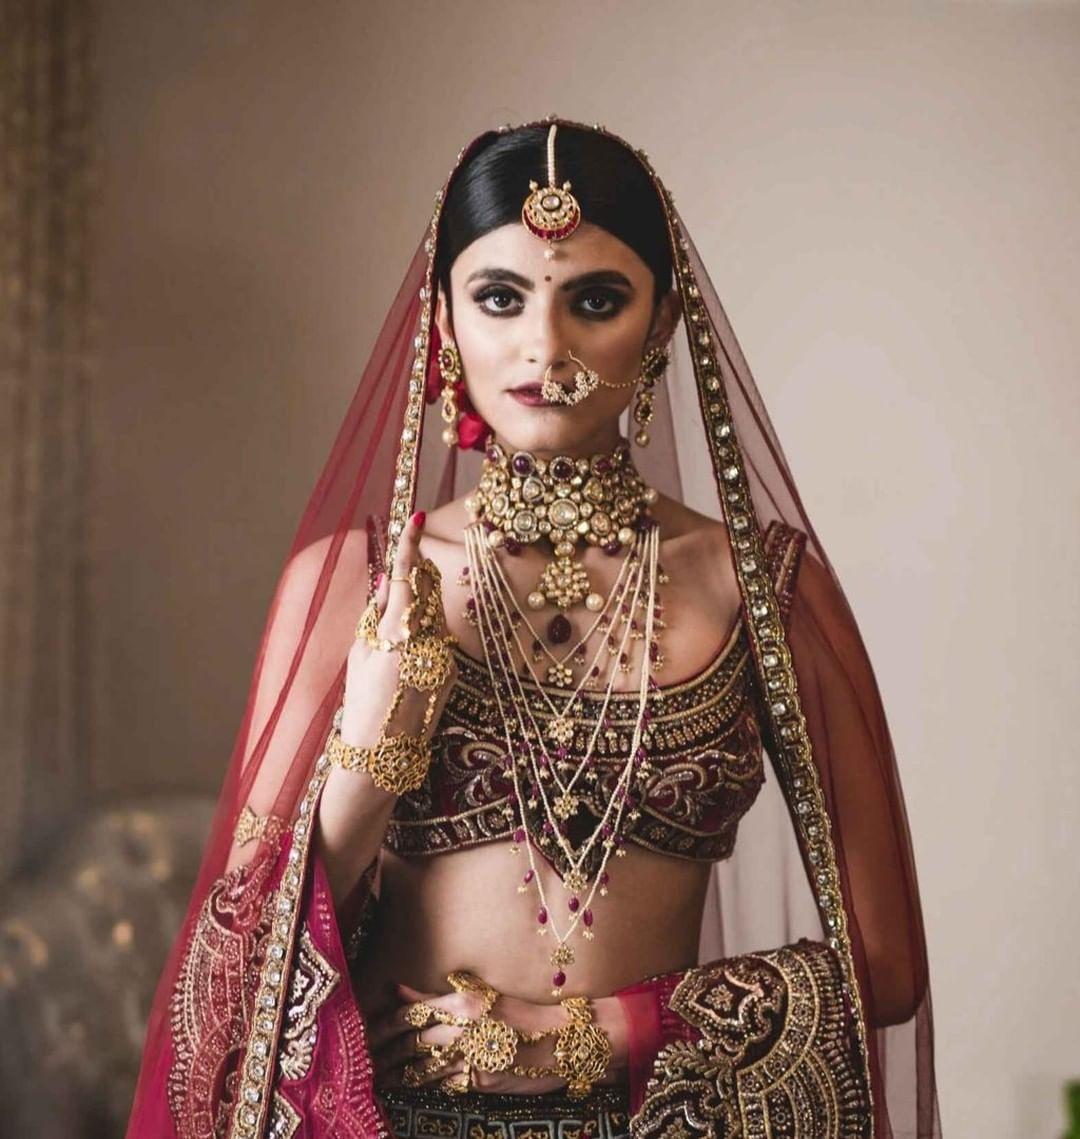 The Most Stunning Nath Designs We Spotted On Maharashtrian Brides! |  WedMeGood